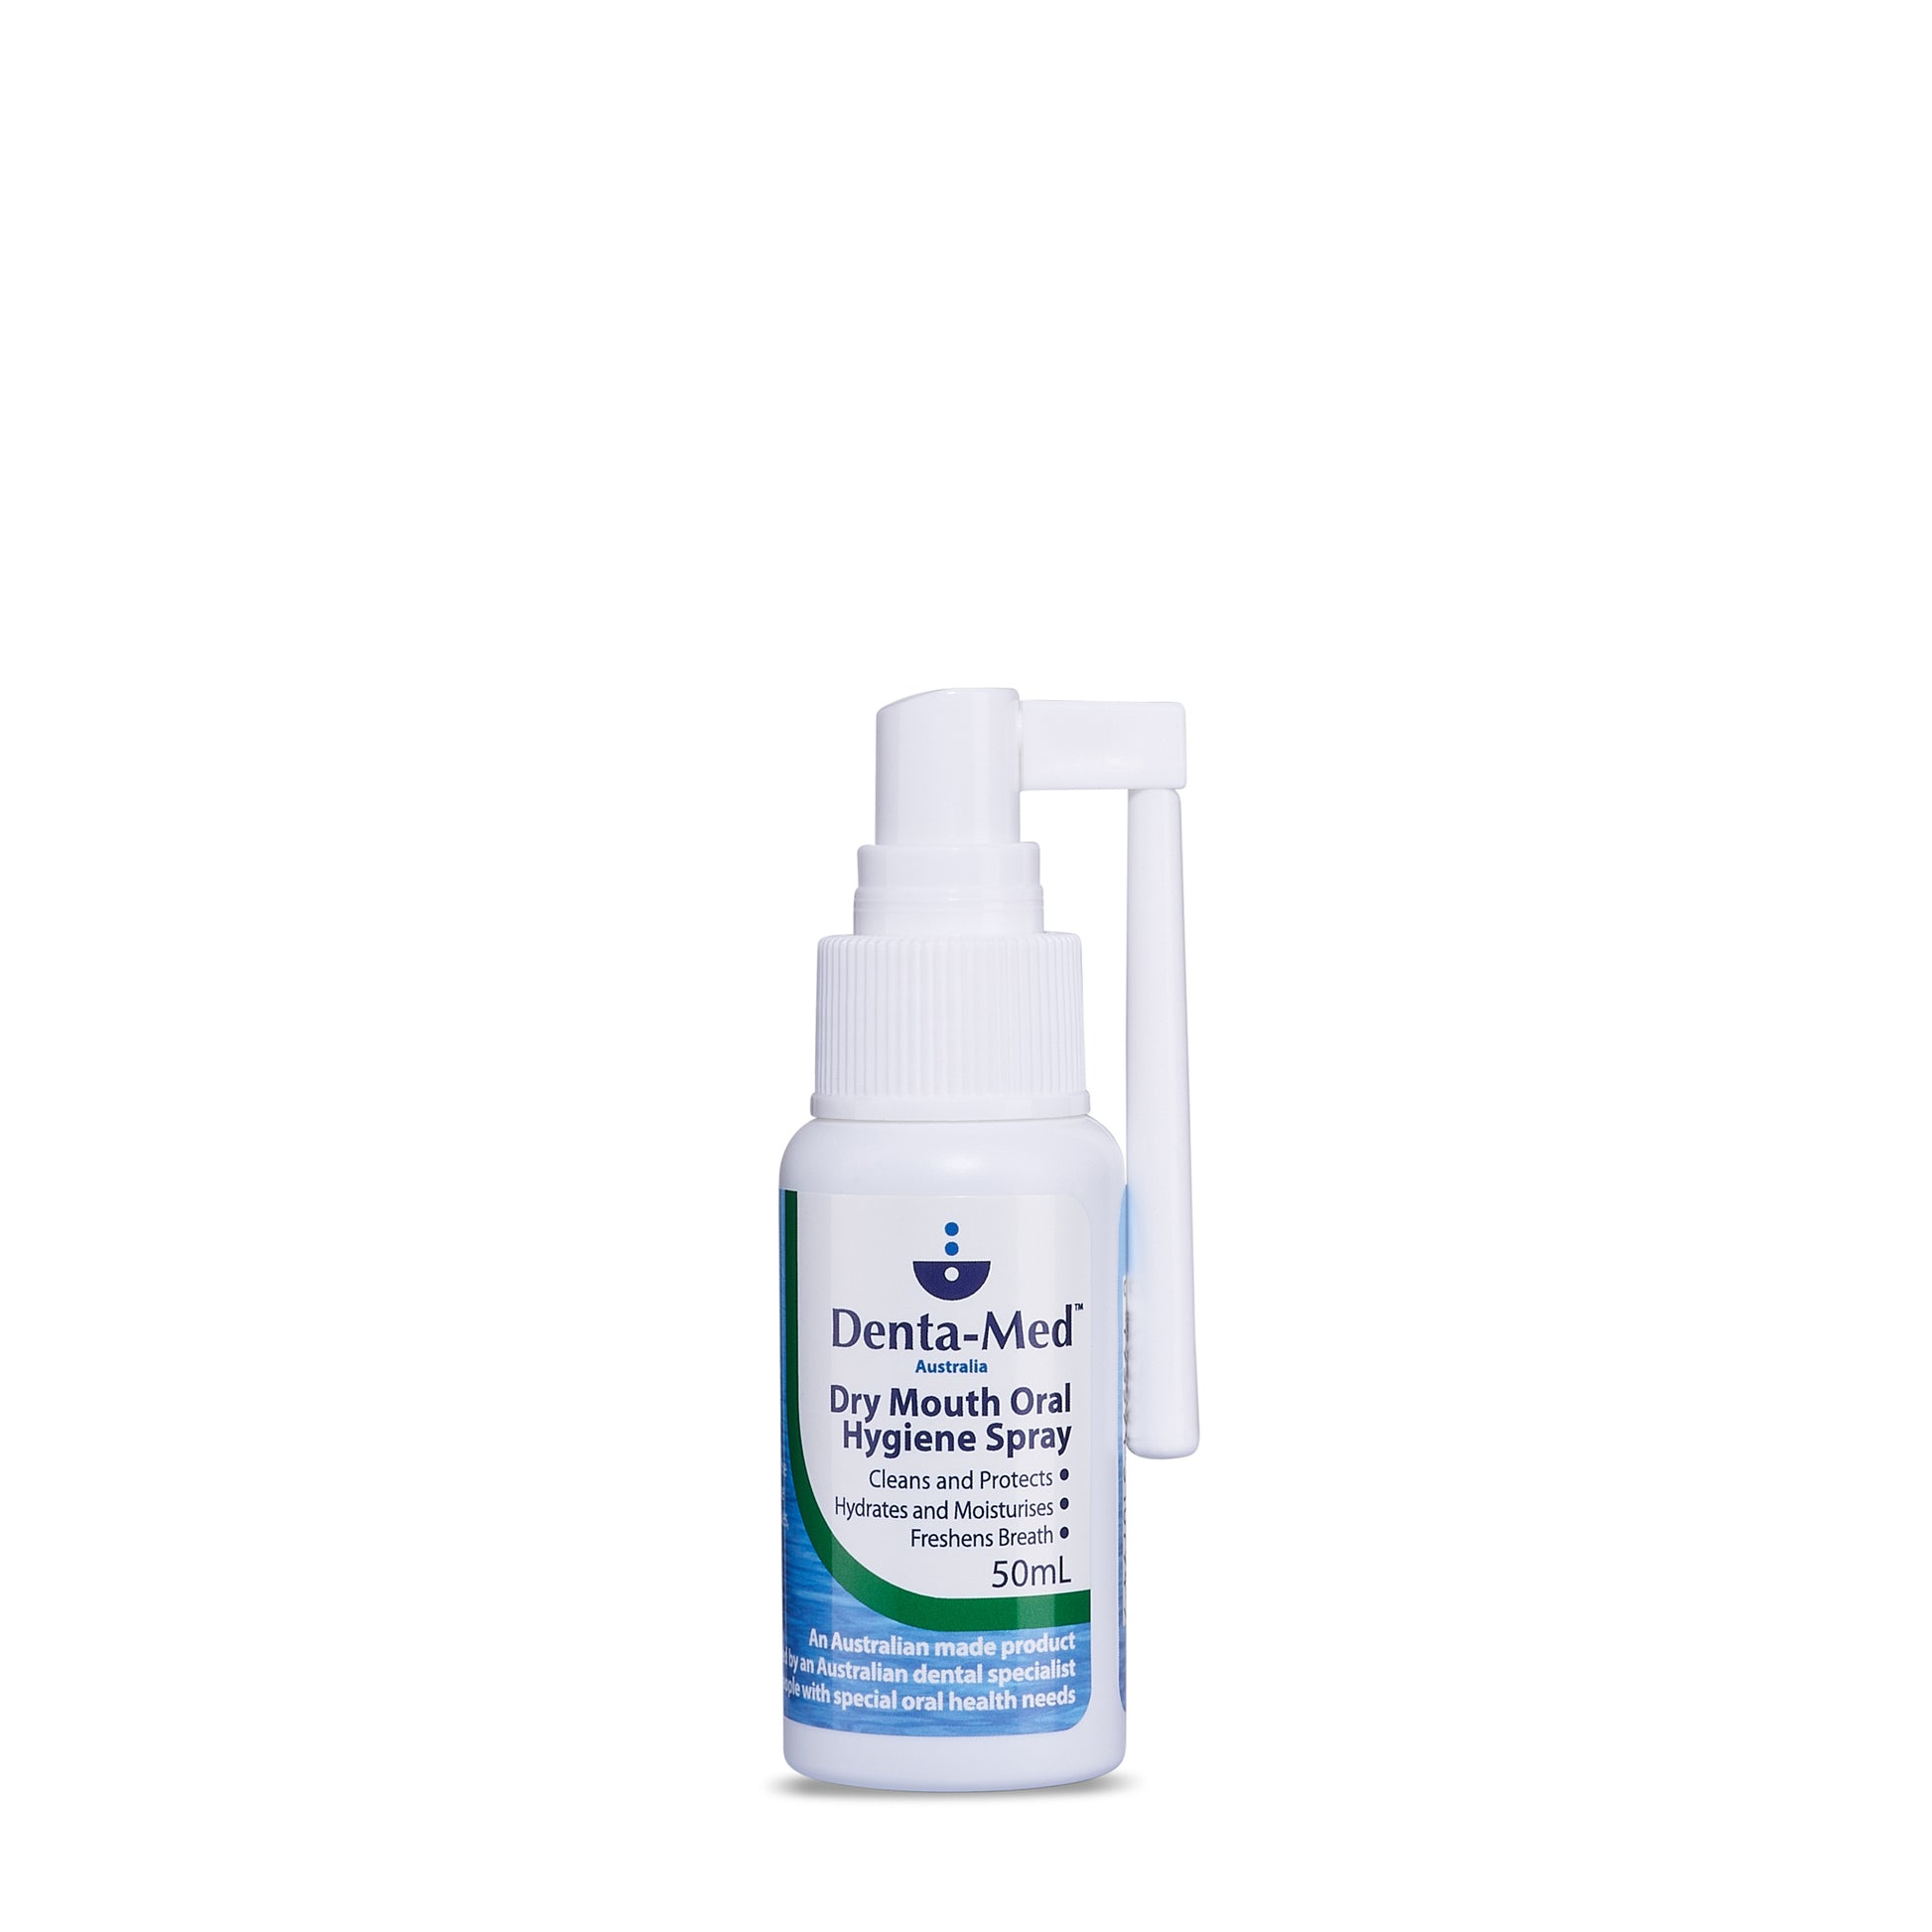 Dry Mouth Oral Hygiene Spray 50mL with extended 360 nozzle